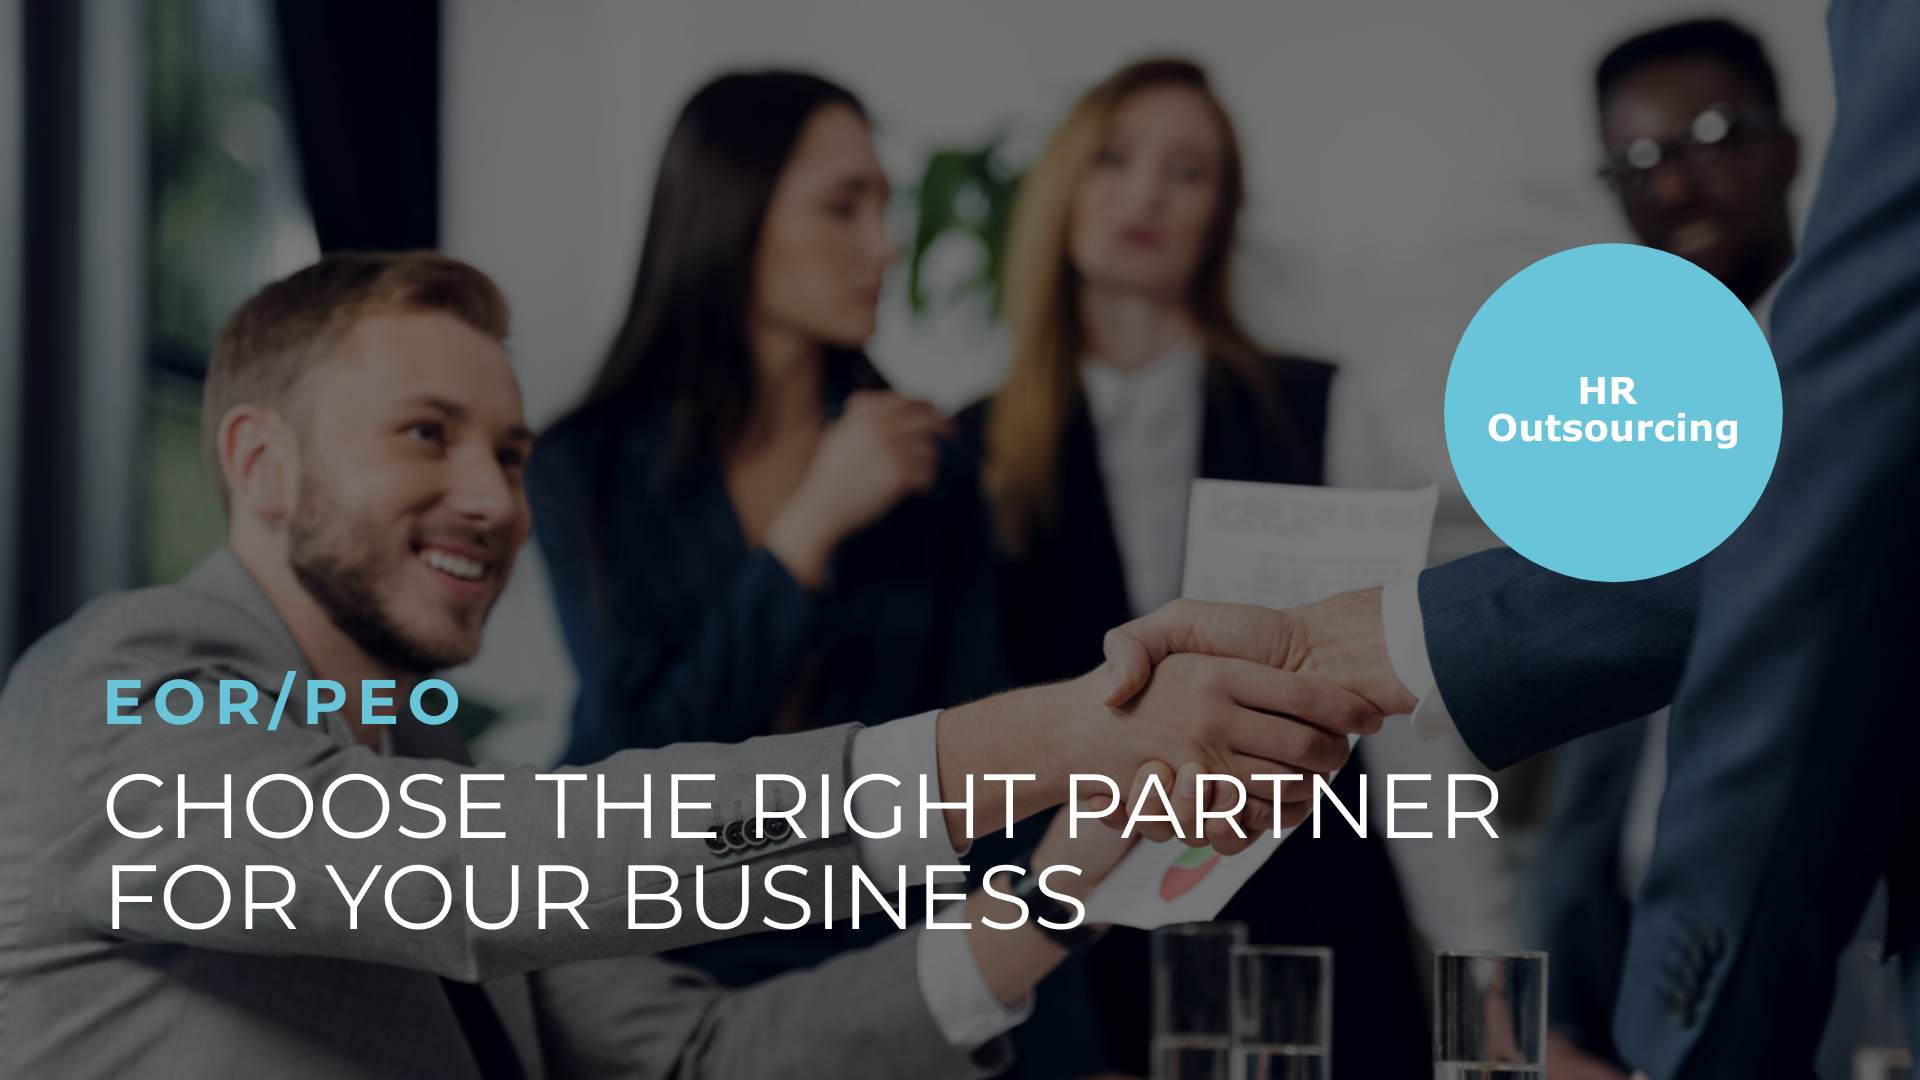 How to Choose the Right PEO/EoR Partner?